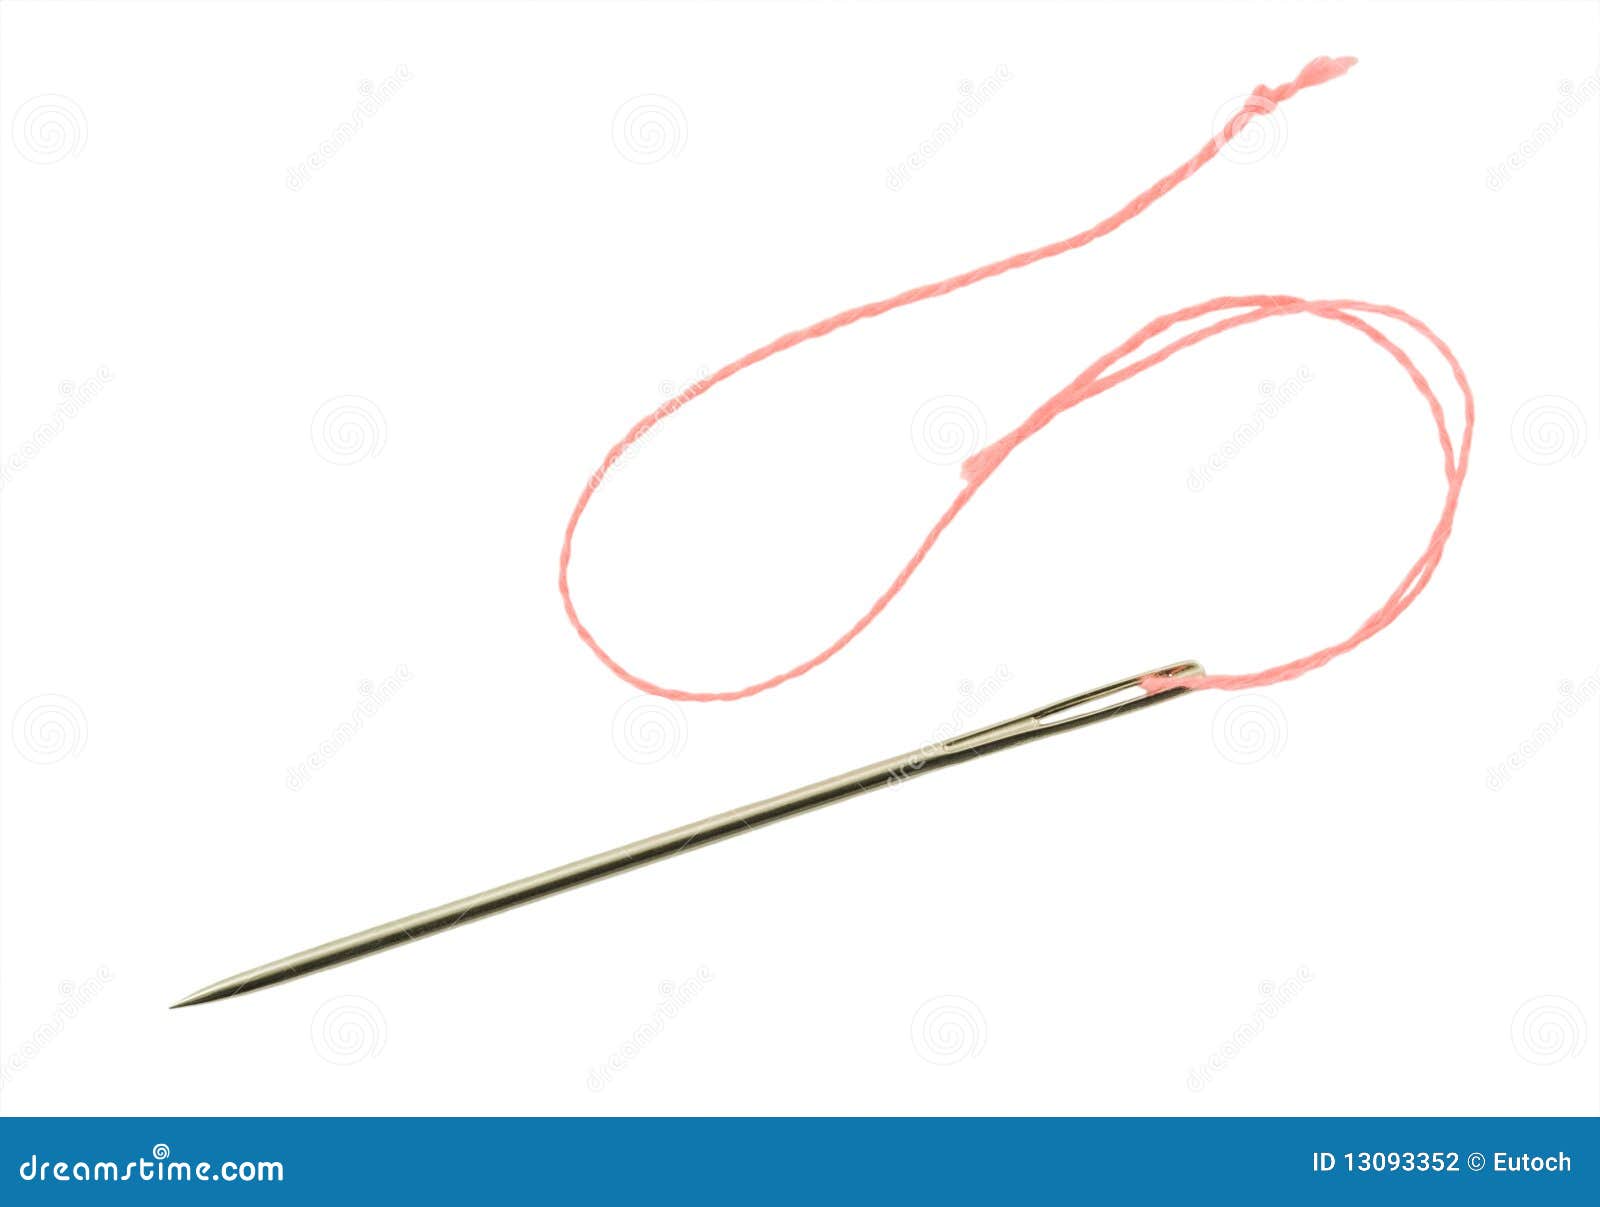 Isolated Silver Sewing Needle Red Thread Isolated On White High-Res Vector  Graphic - Getty Images